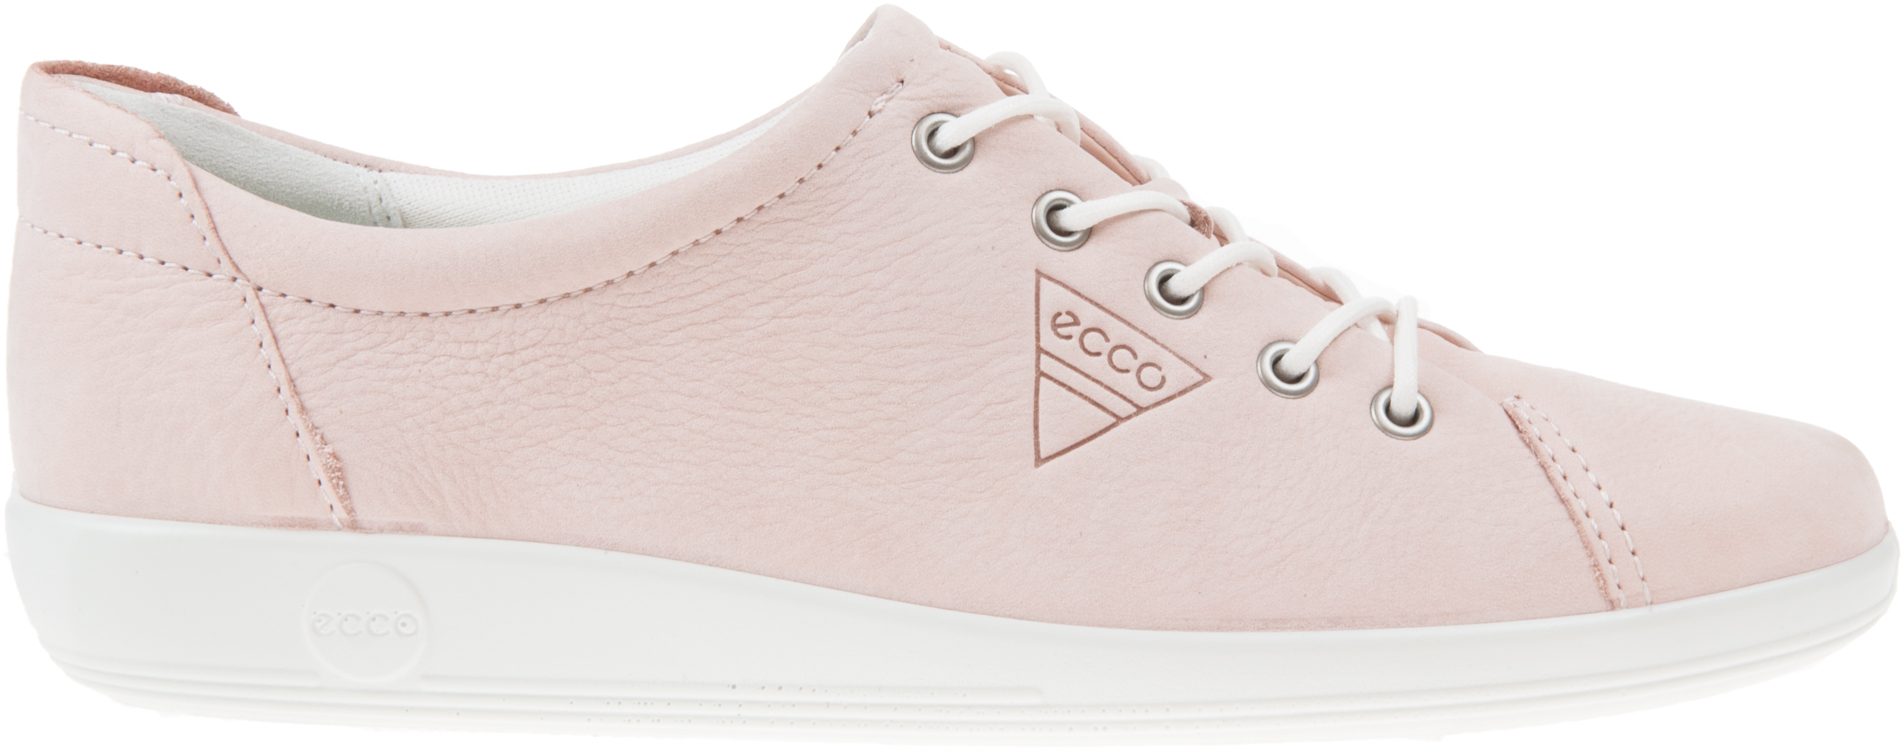 Ecco Soft 2.0 Lace Rose Dust Nubuck 206503 02118 - Everyday Shoes ...